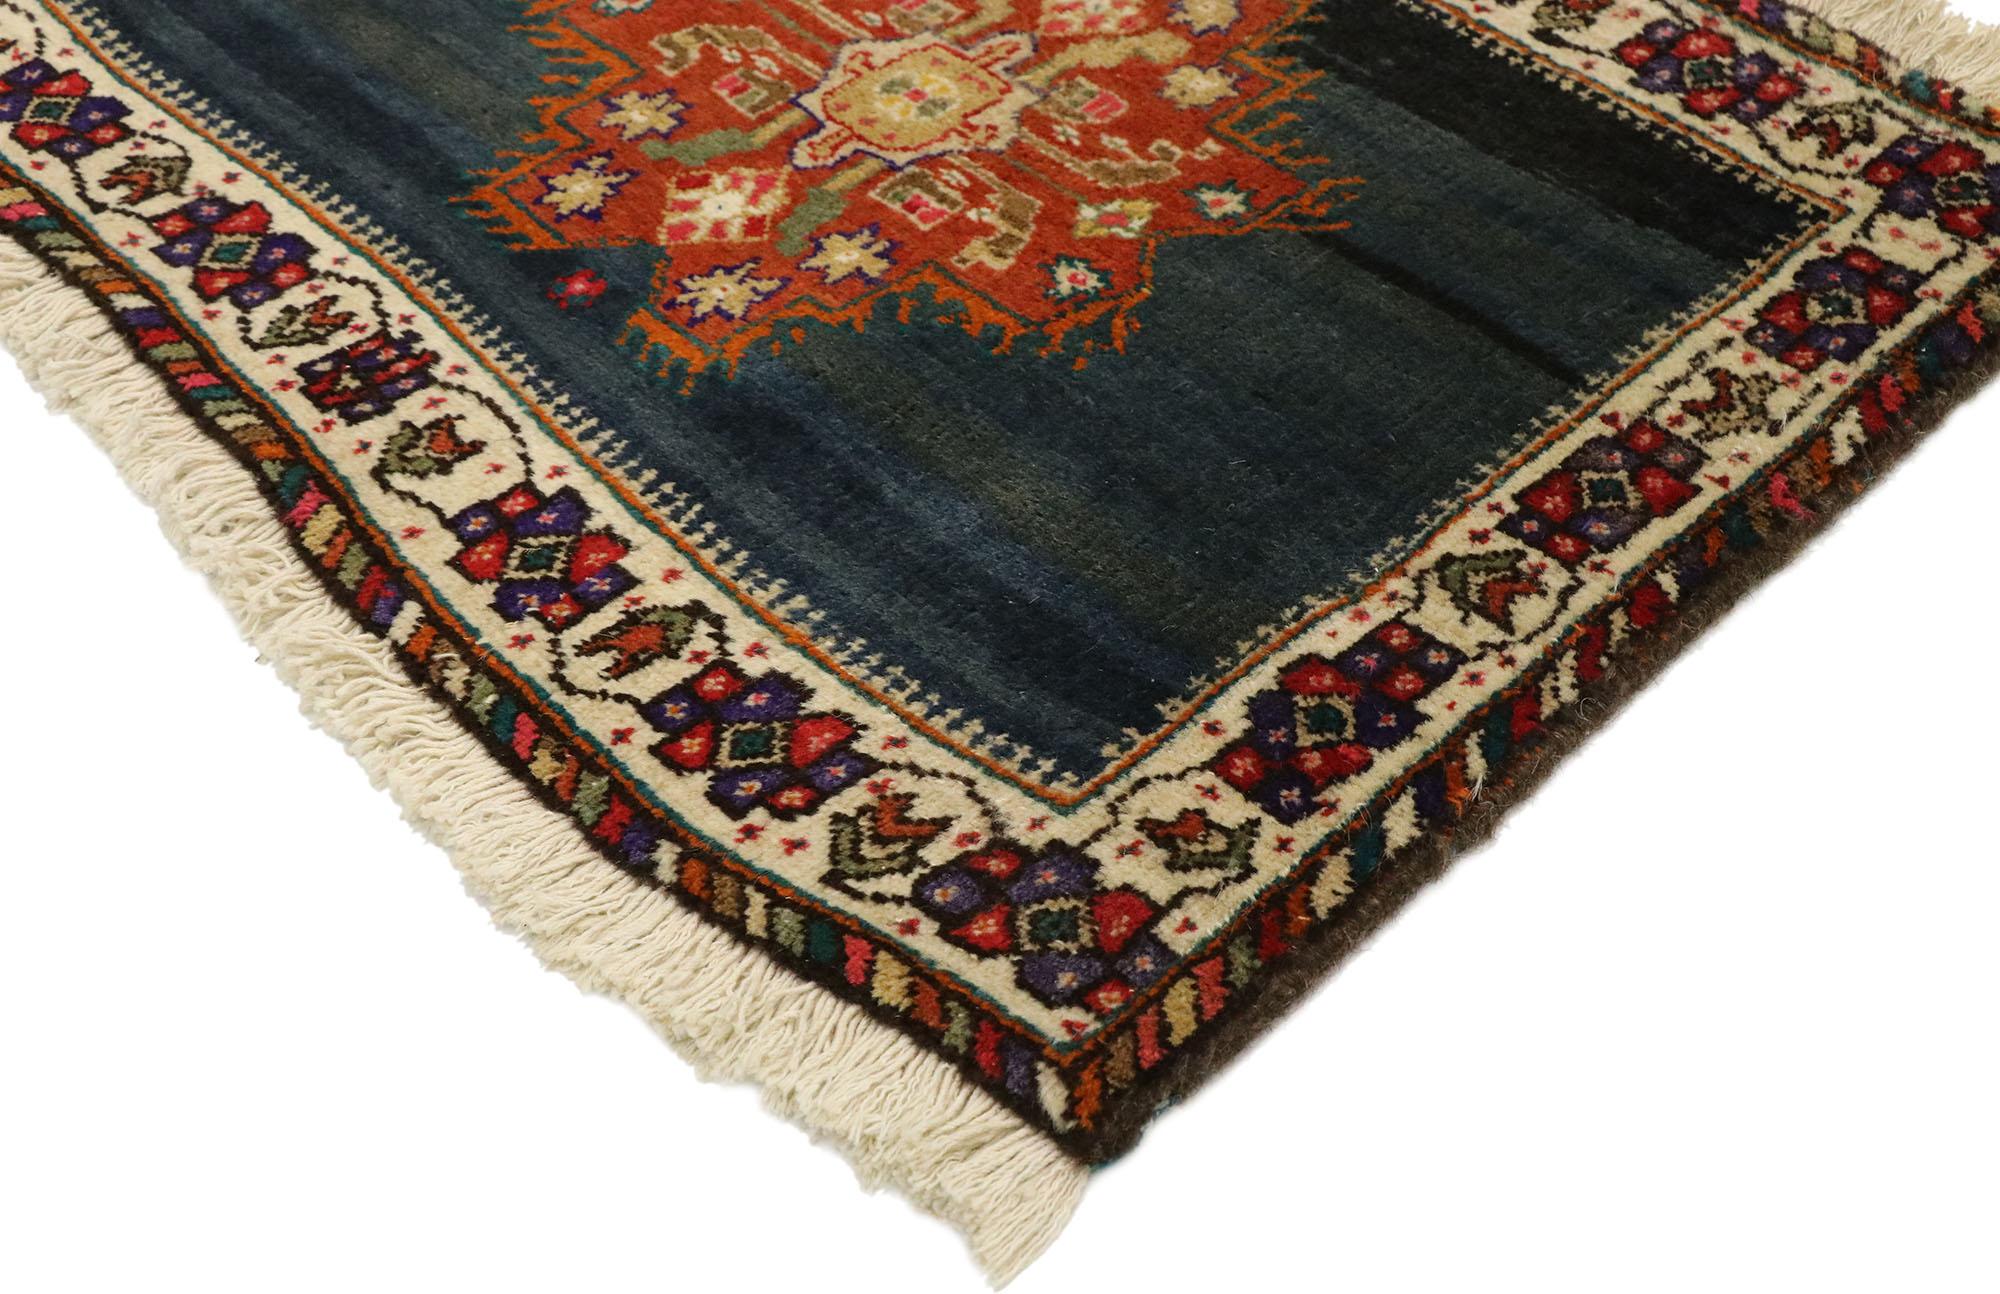 76203, vintage Persian Tabriz scatter rug with federal American traditional style. Immersed in Persian history and refined colors, this hand knotted wool vintage Persian Tabriz scatter rug is poised to impress. The abrashed midnight navy blue field